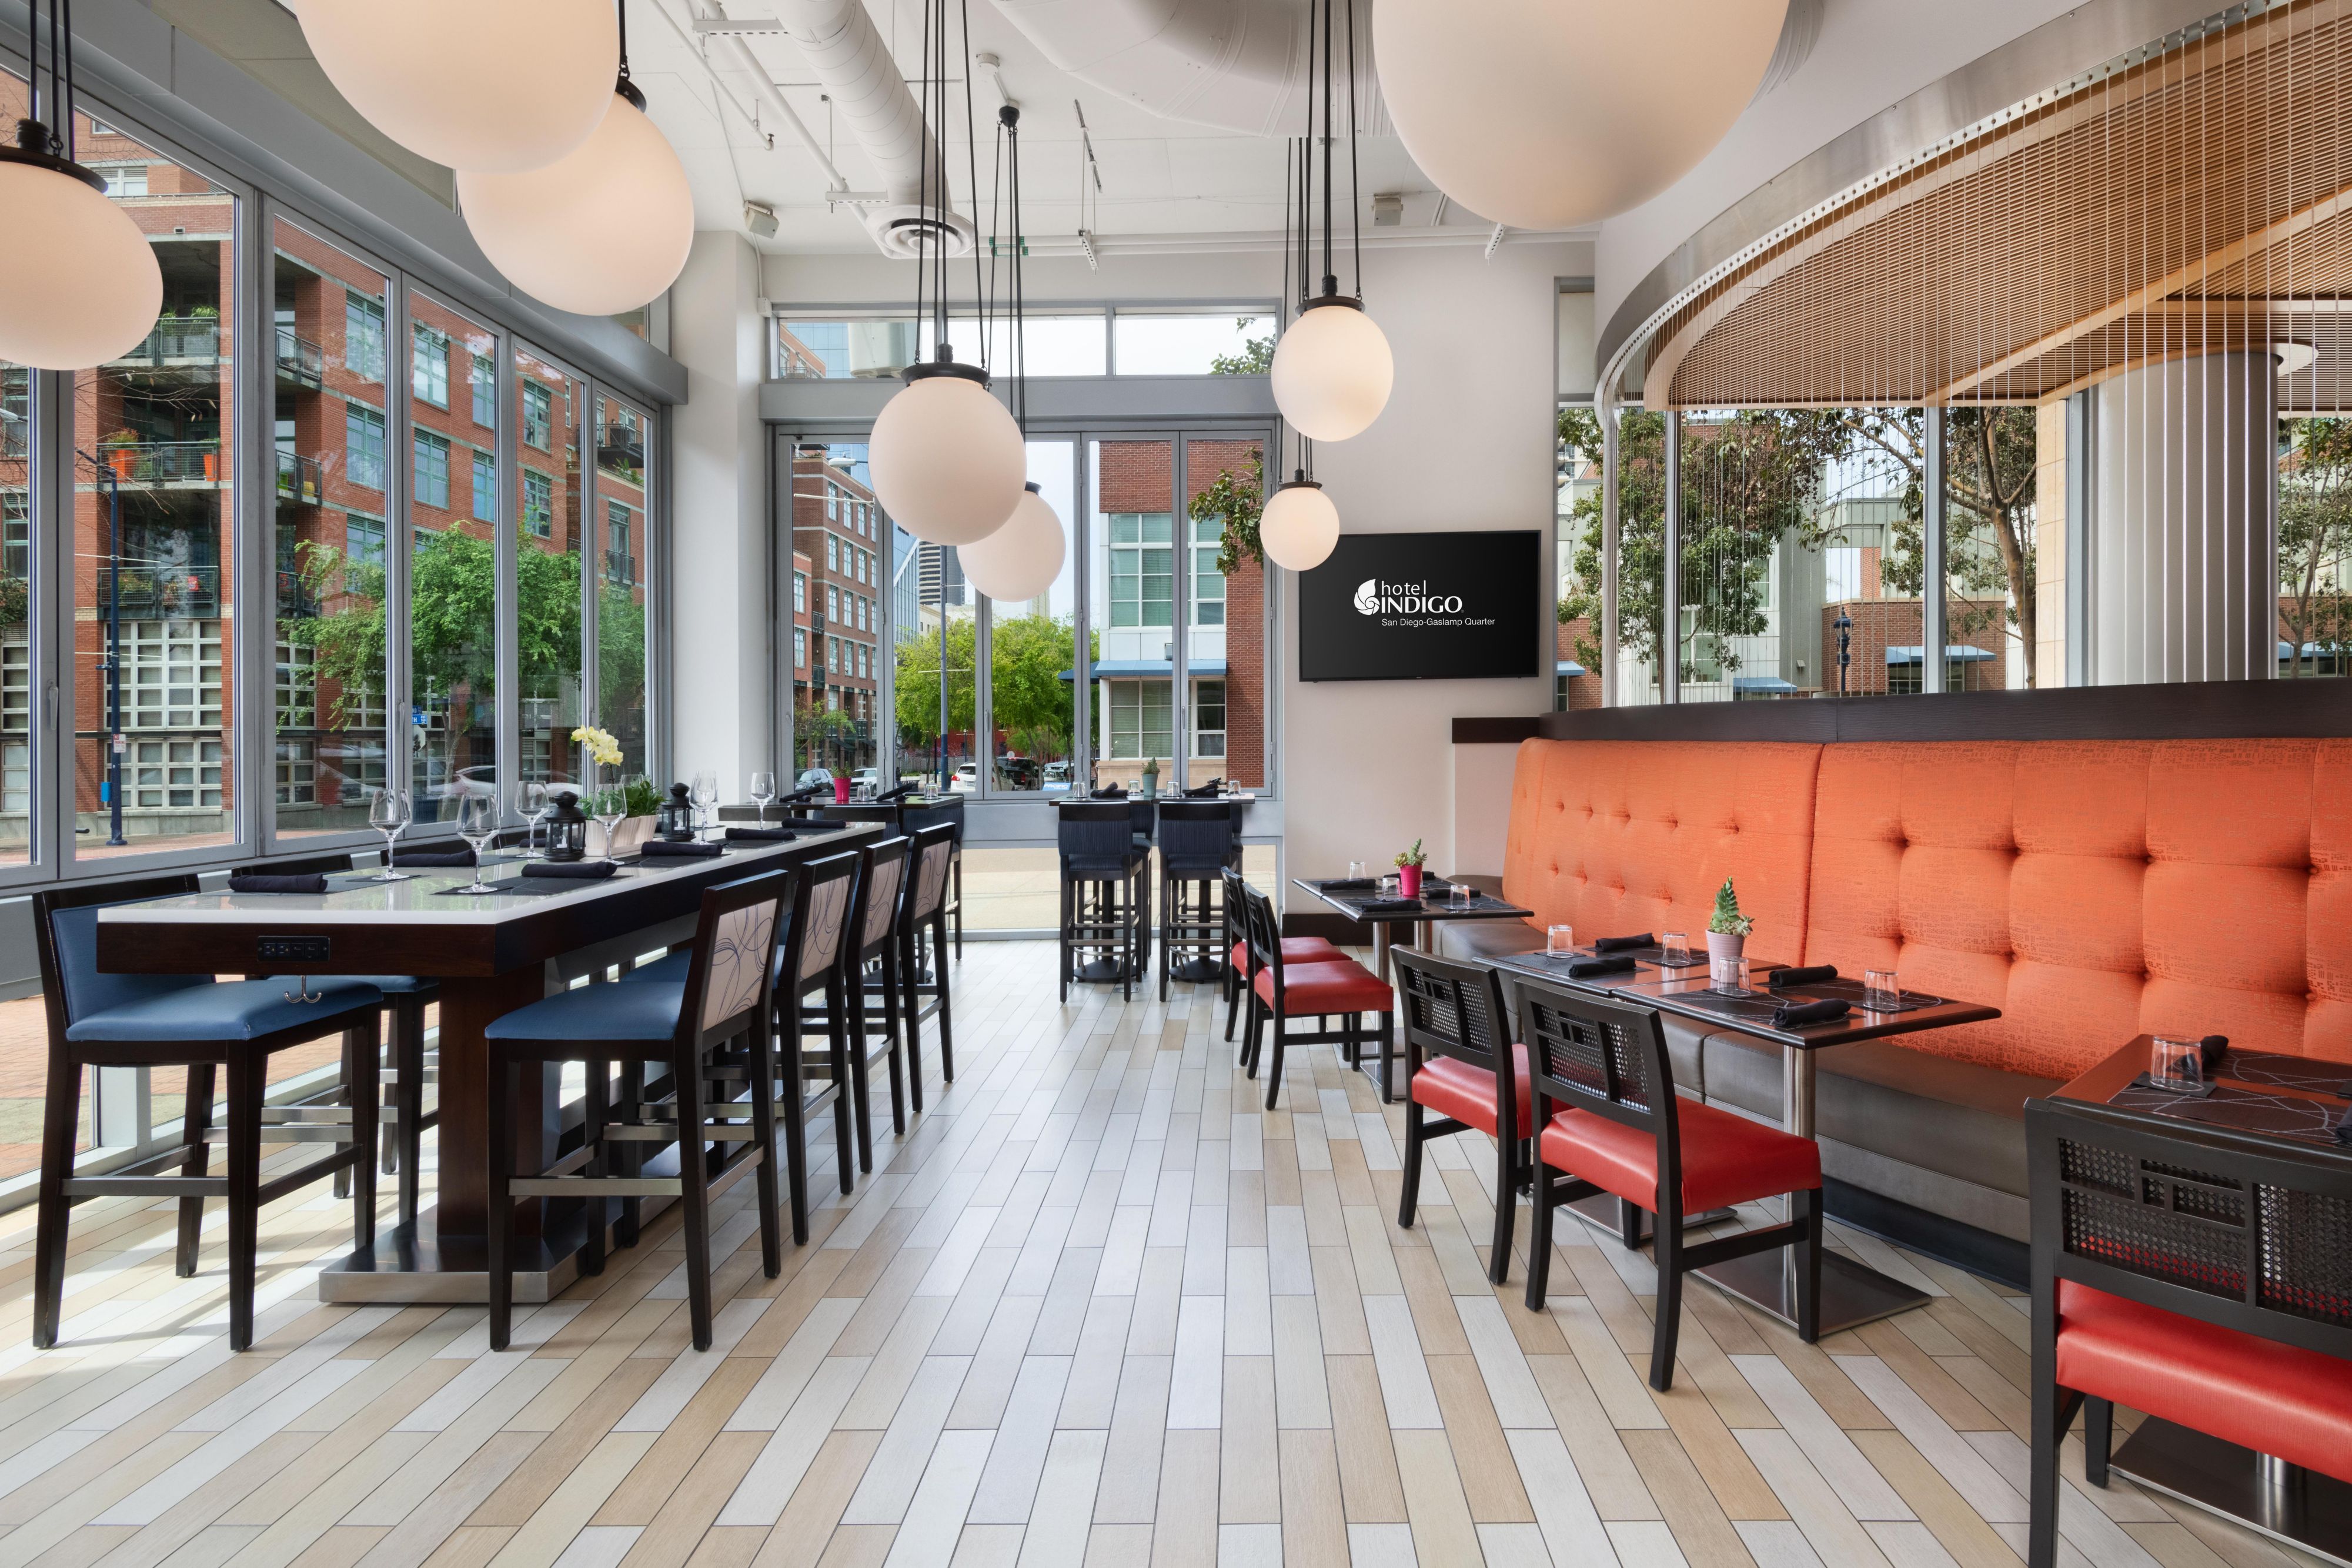 Offering delicious American cuisine for breakfast, lunch, and dinner, Table 509 is an ideal venue for parties, rehearsal dinners, and celebrations. In addition, the 9th Avenue Market features light snacks for a quick pick-me-up. 